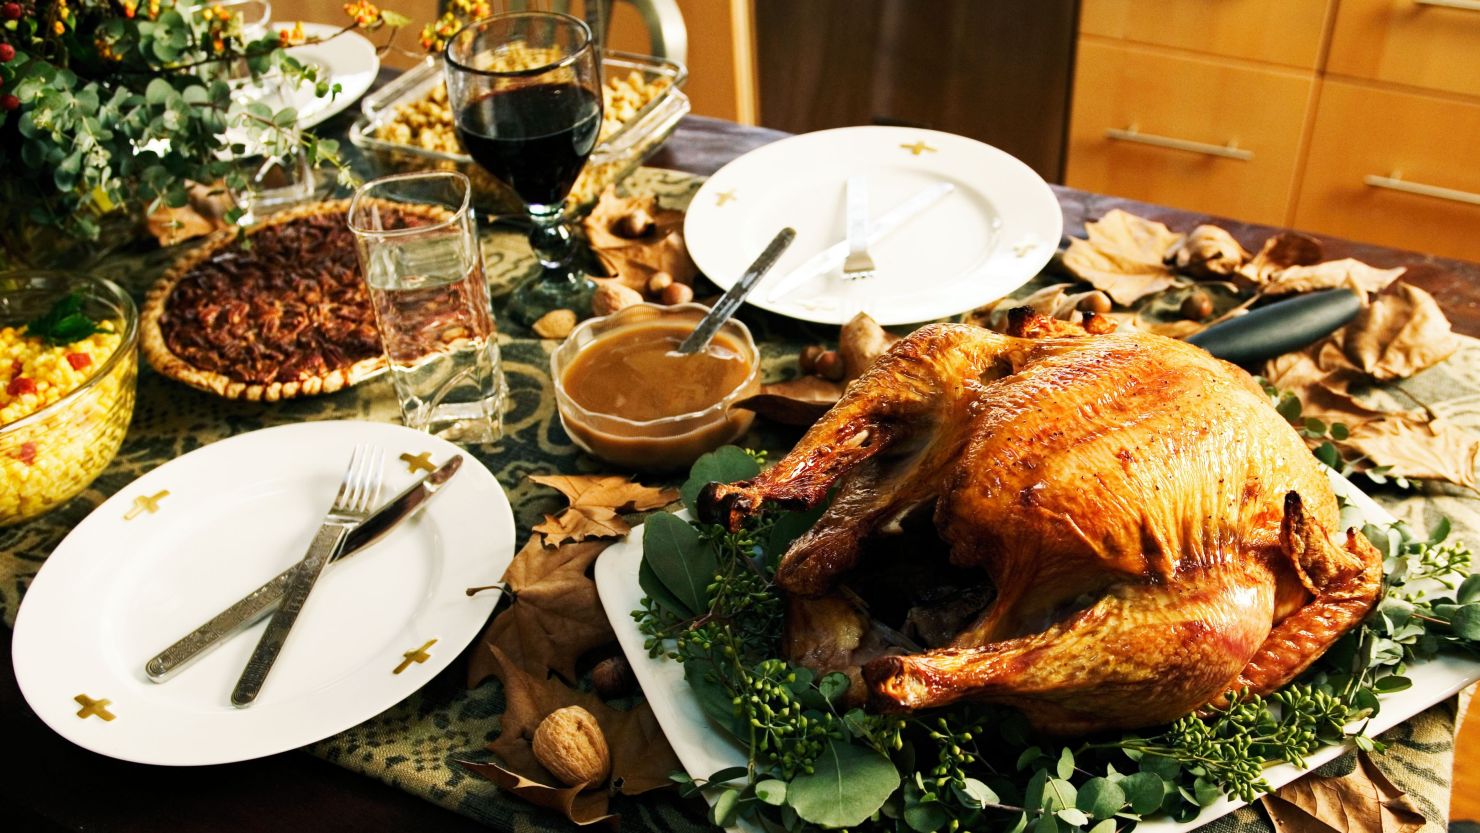 Overabundant food and large holiday meals can trigger anxiety for those recovering from an eating disorder.